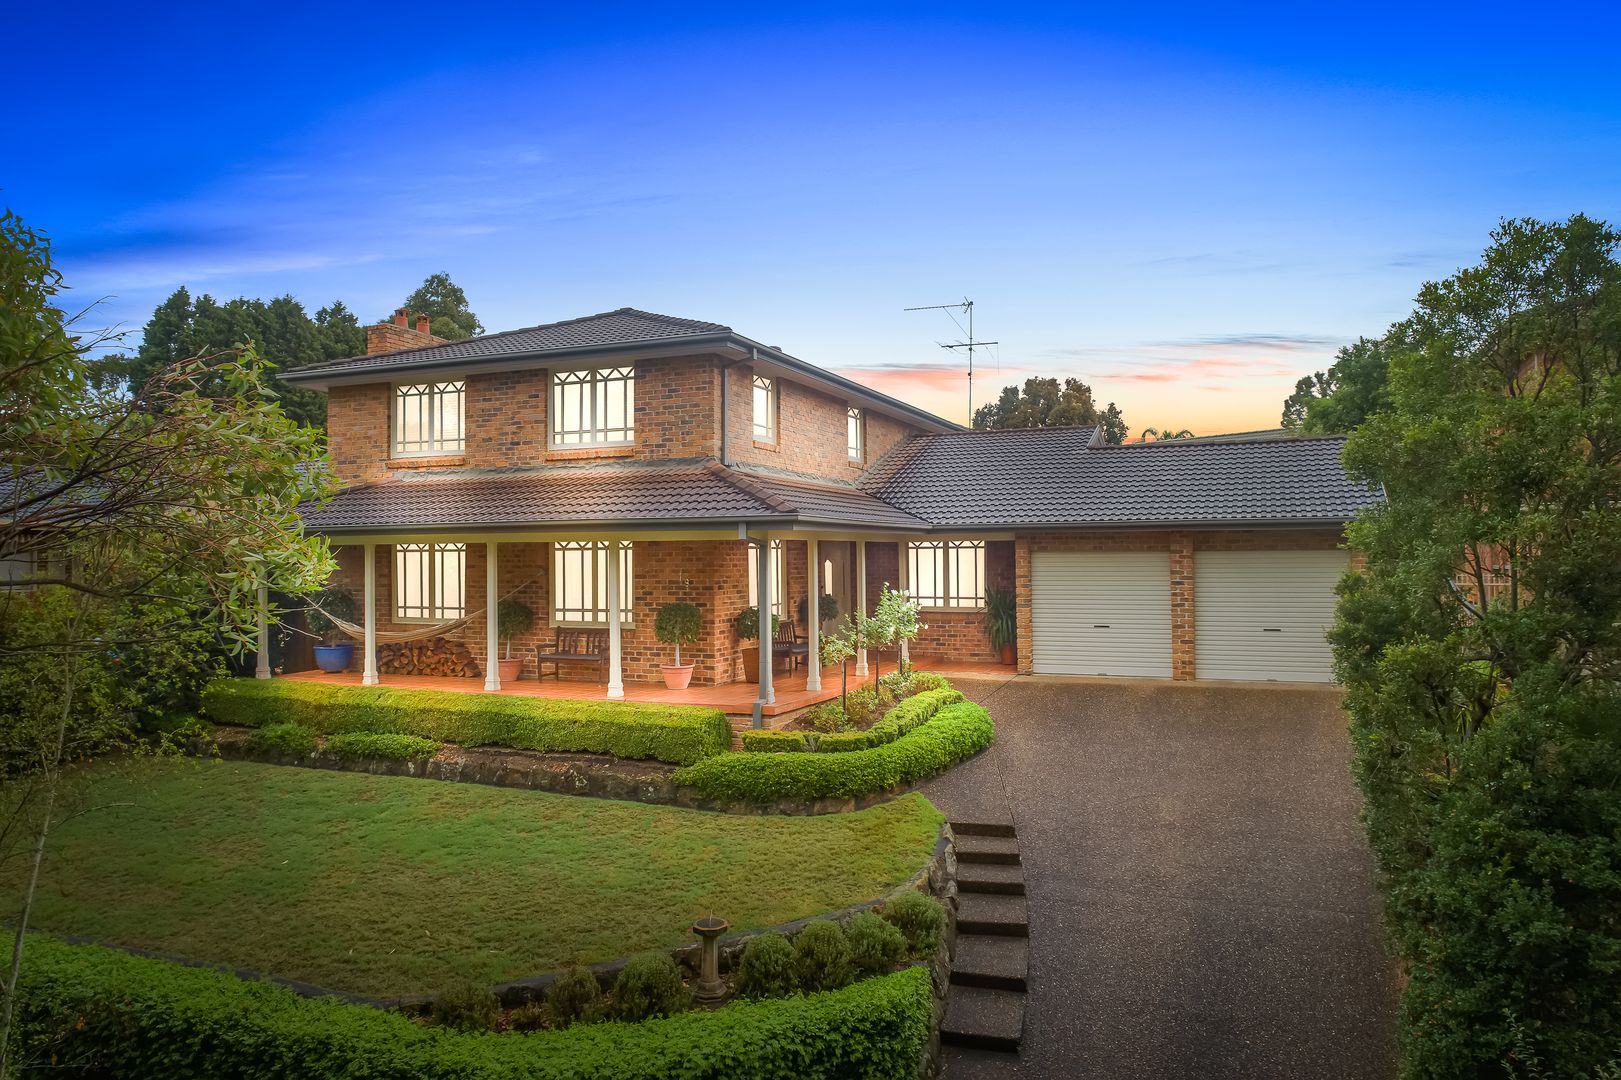 19 Forester Crescent, Cherrybrook NSW 2126